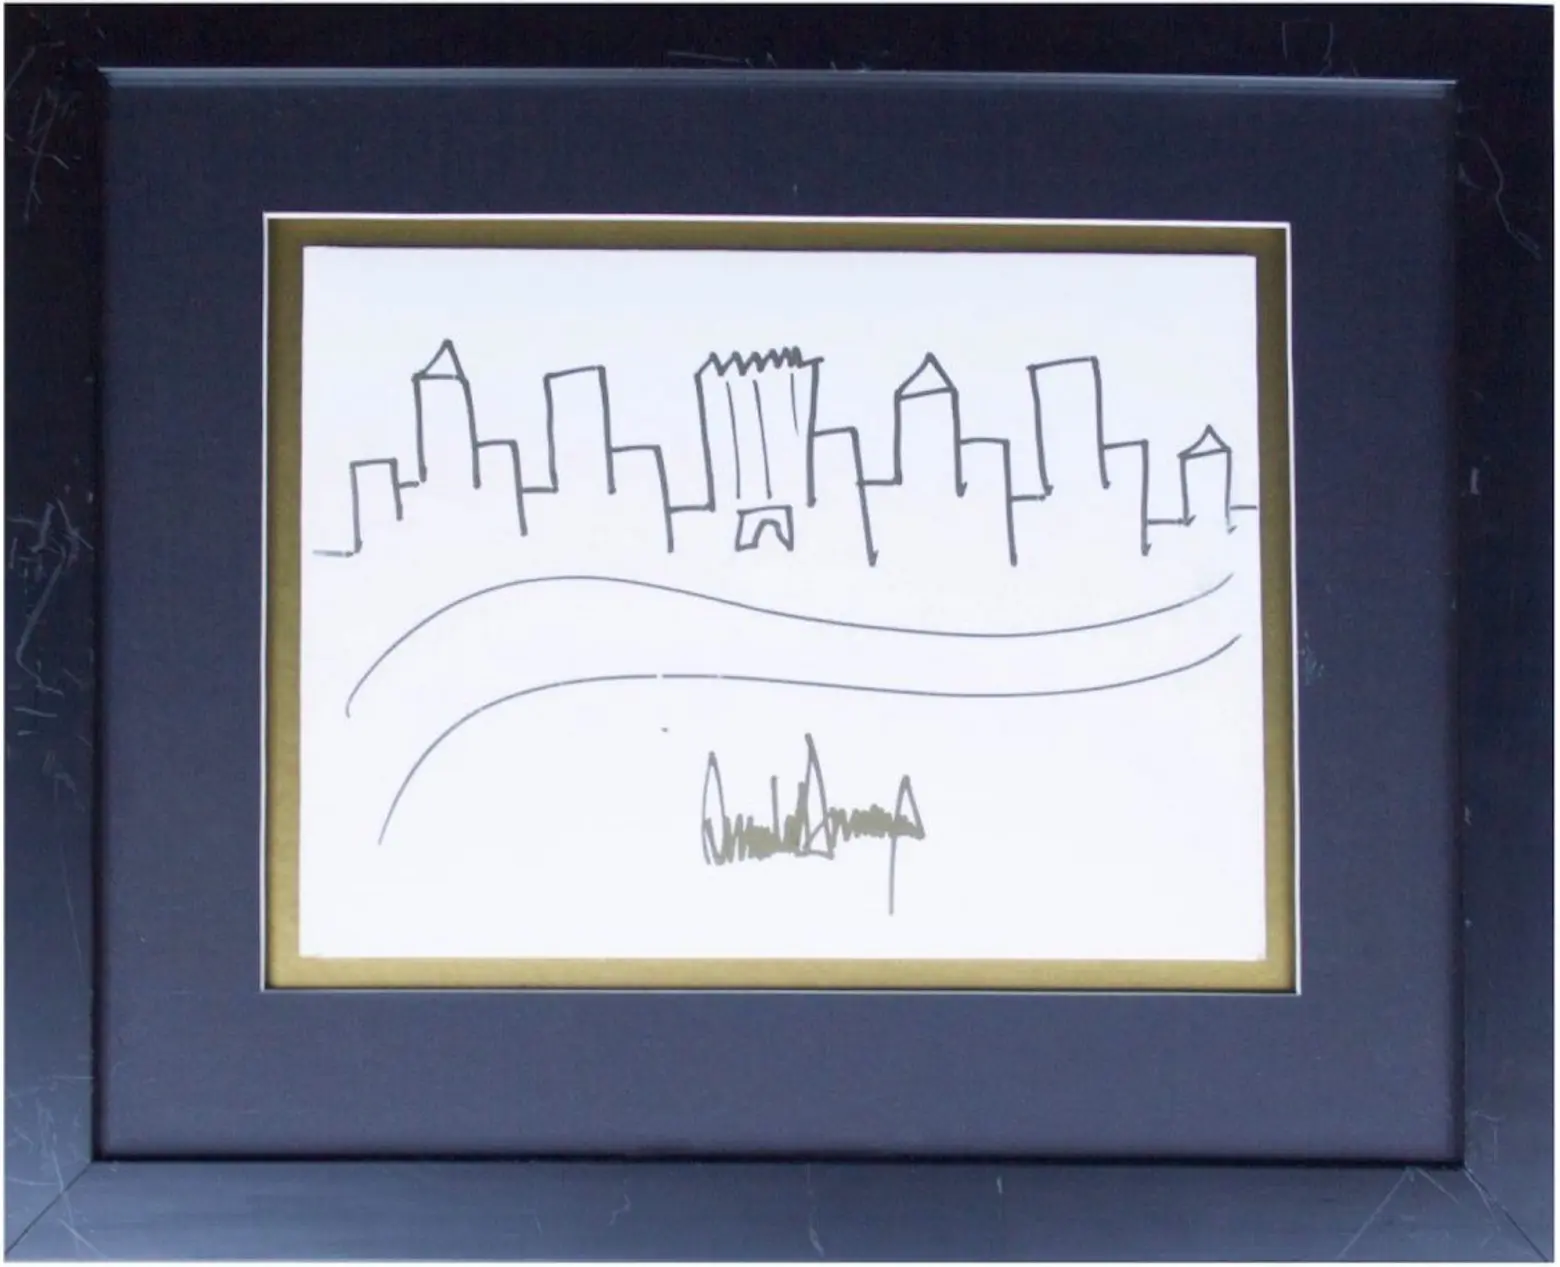 Donald Trump’s sketch of the Manhattan skyline sells for $29,184 at auction